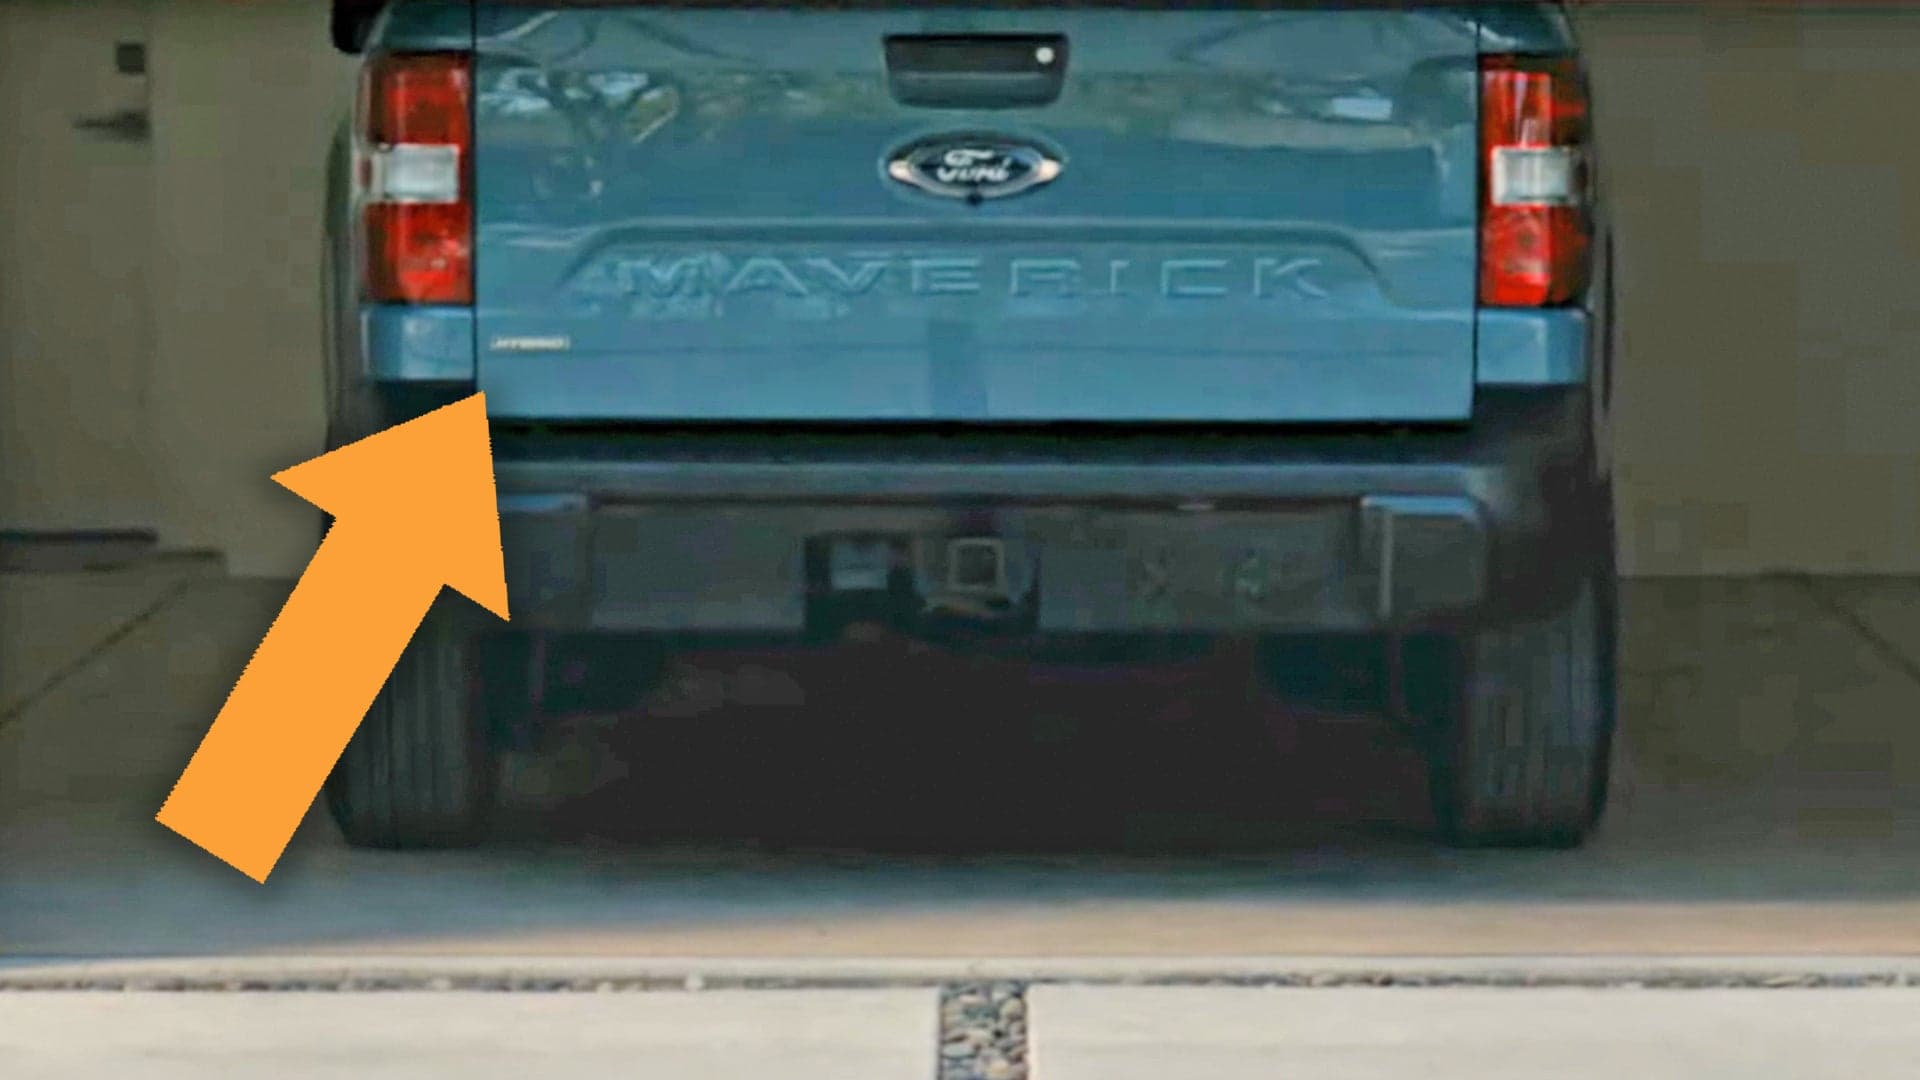 Teaser Shows 2022 Ford Maverick Compact Pickup Will Have Hybrid Version